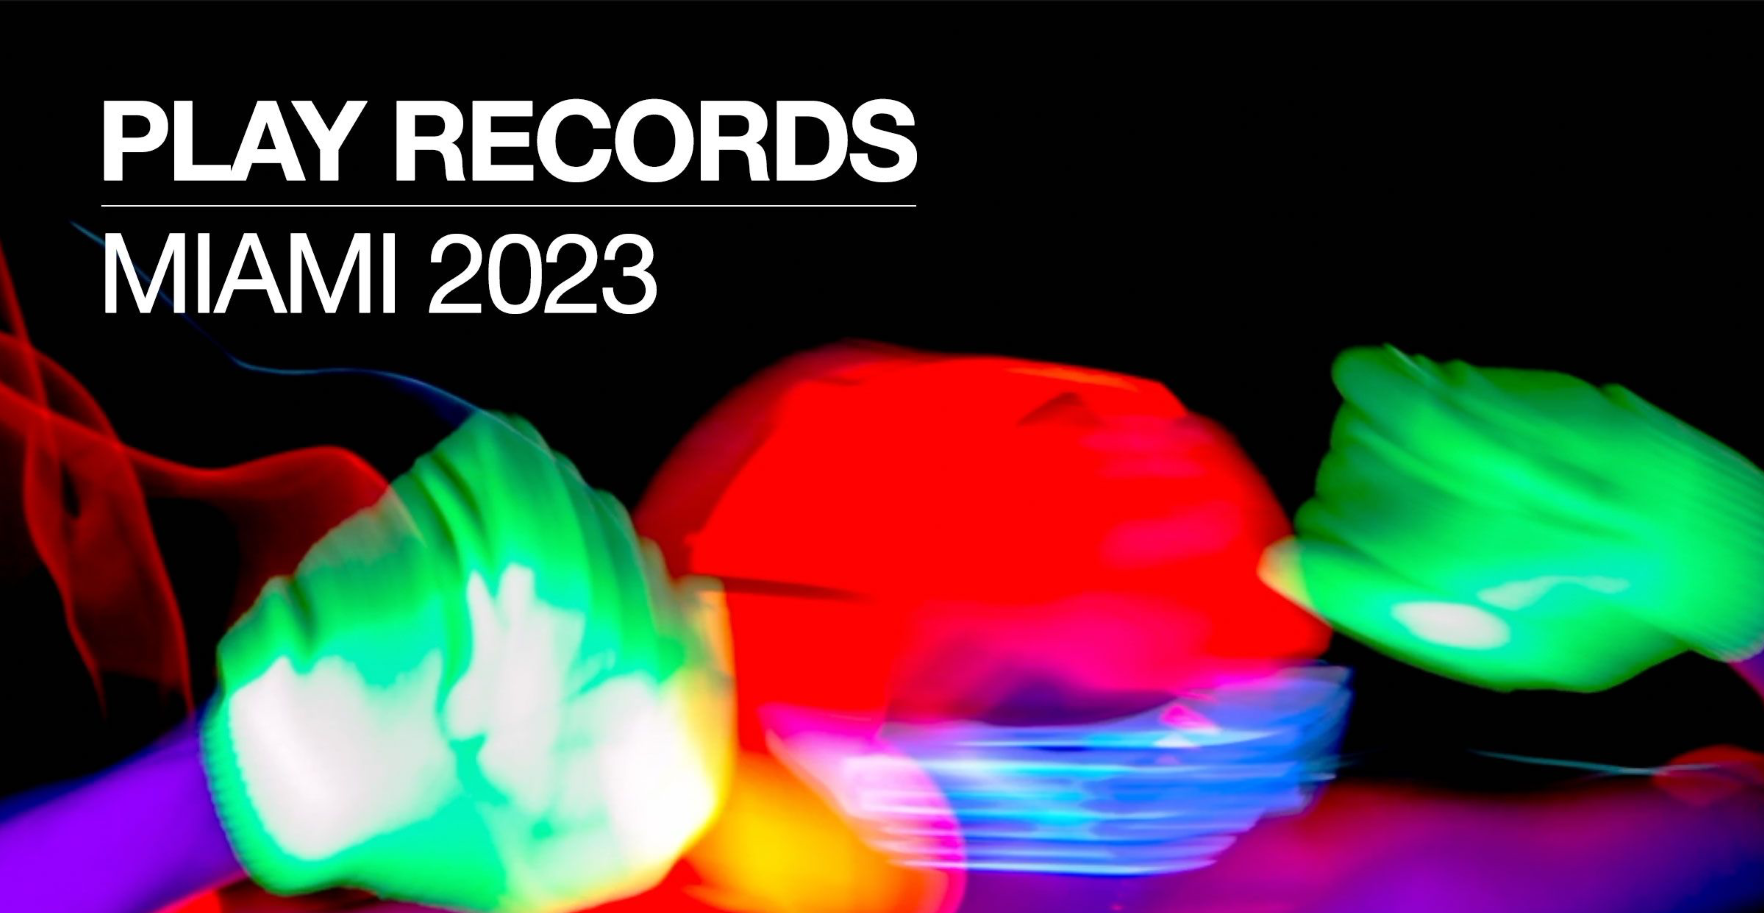 Play Records releases “Miami 2023” mix